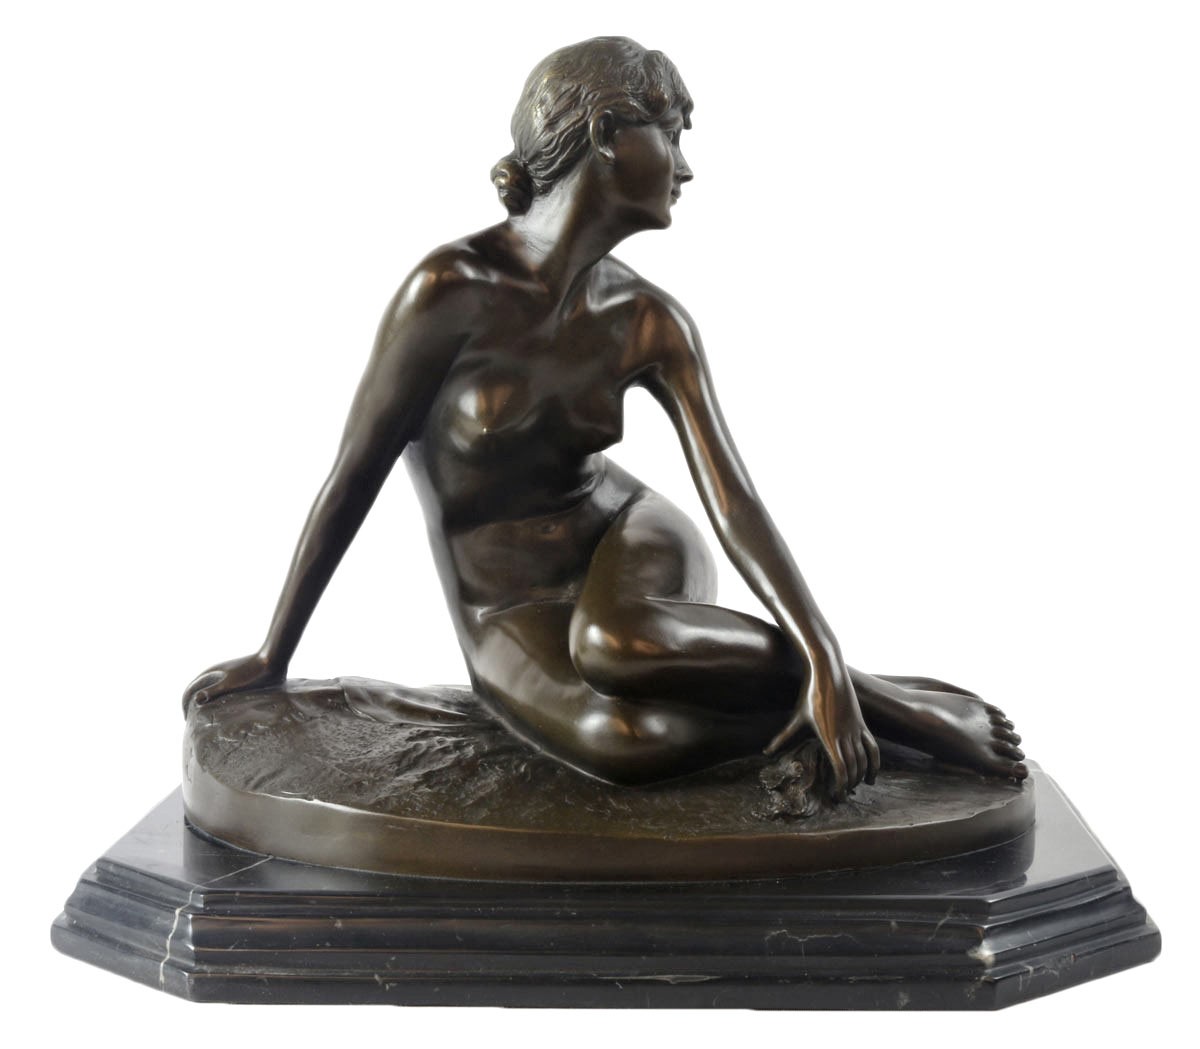 Nude Lady Foundry Cast Bronze Sculpture On Marble Base 35cm